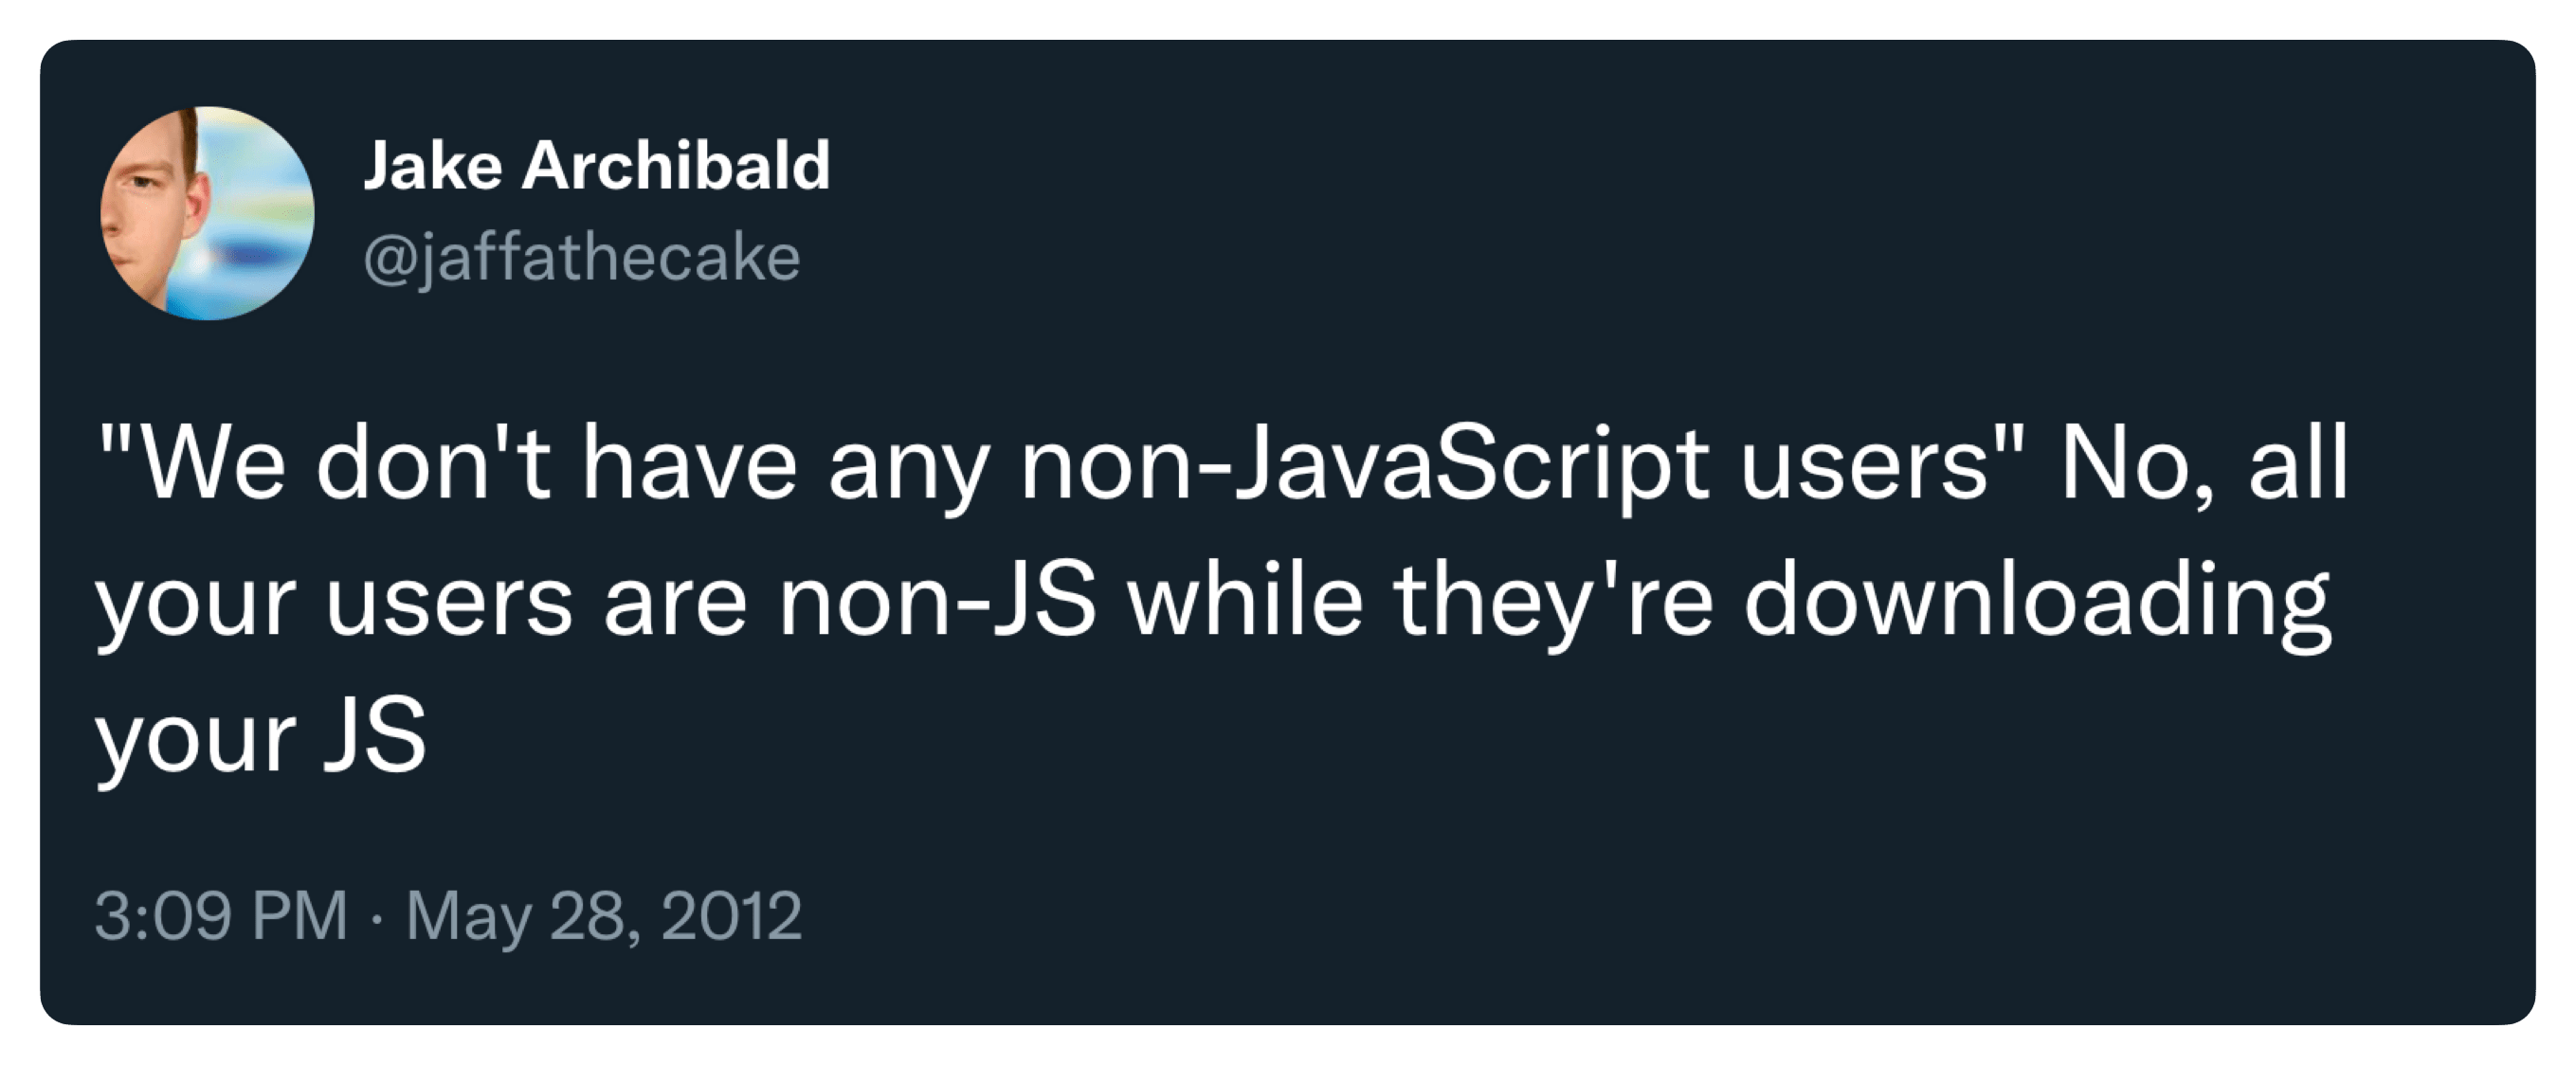 Tweet by Jake Archibald saying: "We don't have any non-JavaScript users". No, all your users are non-JS while they're loading your JS